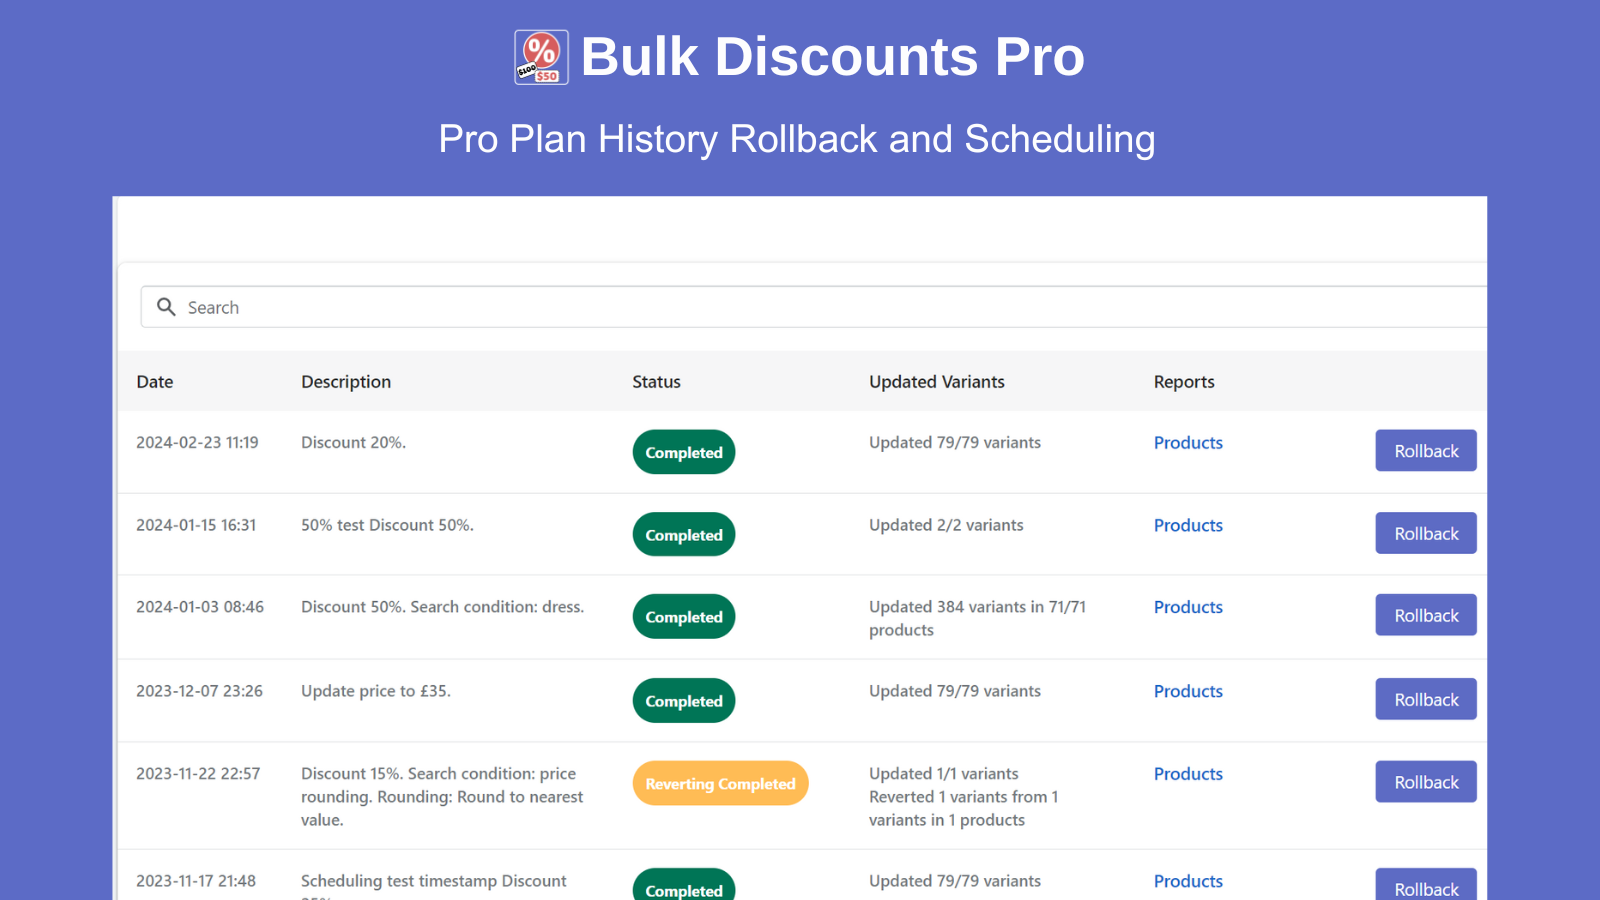 PRO PLAN - Price History and Rollback